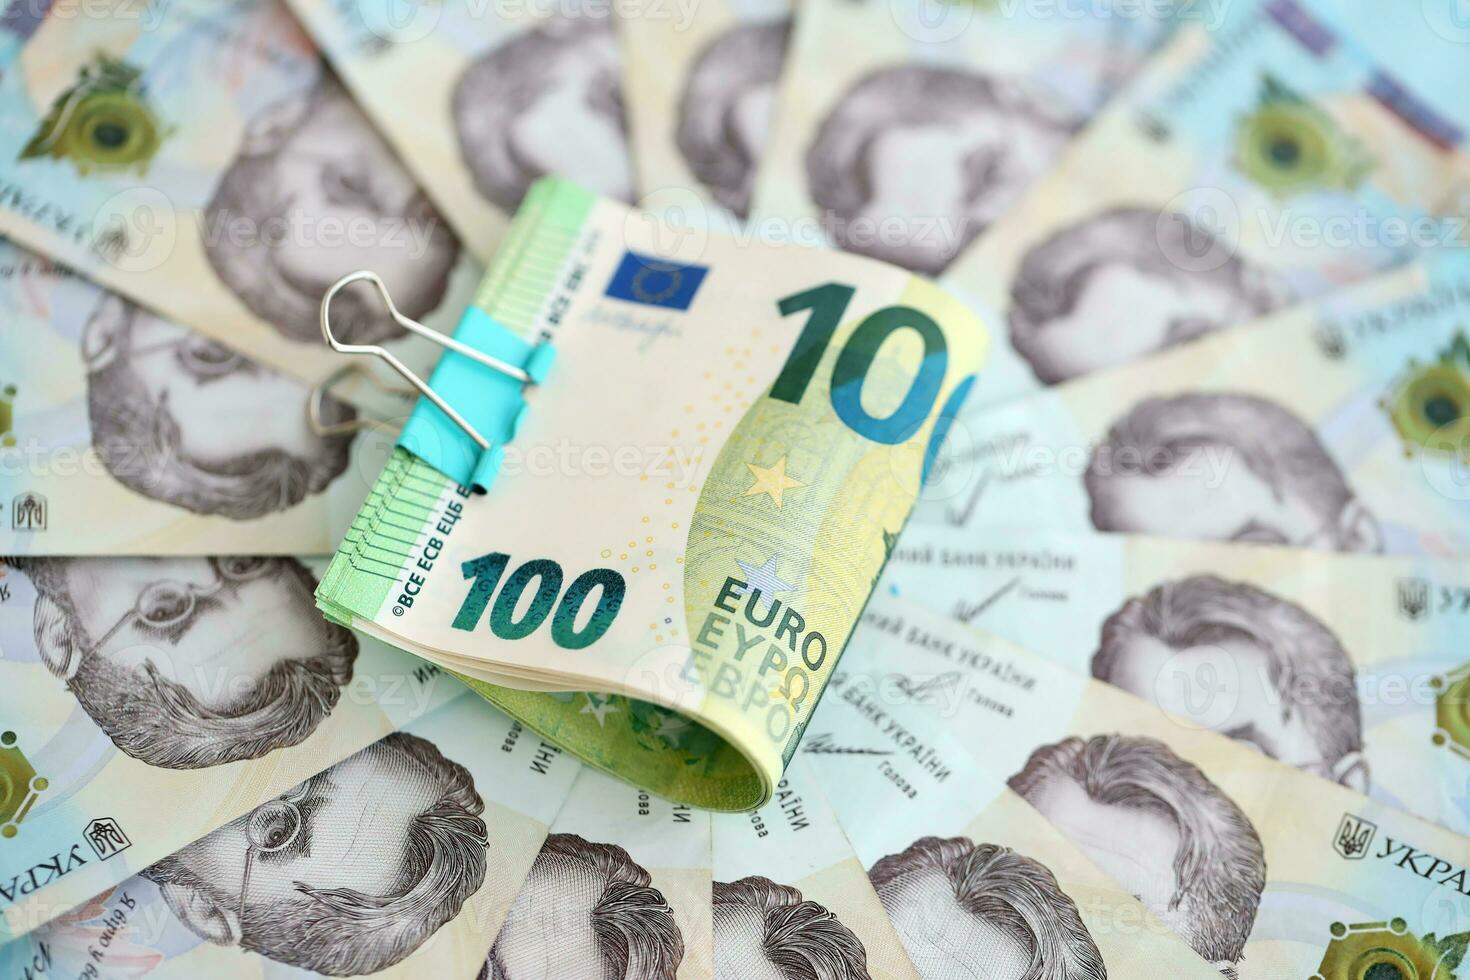 Bunch of hundred euro bills lies on many banknotes of ukrainian hryvnias. Economical default, crisis and devaluation of ukrainian national currency photo